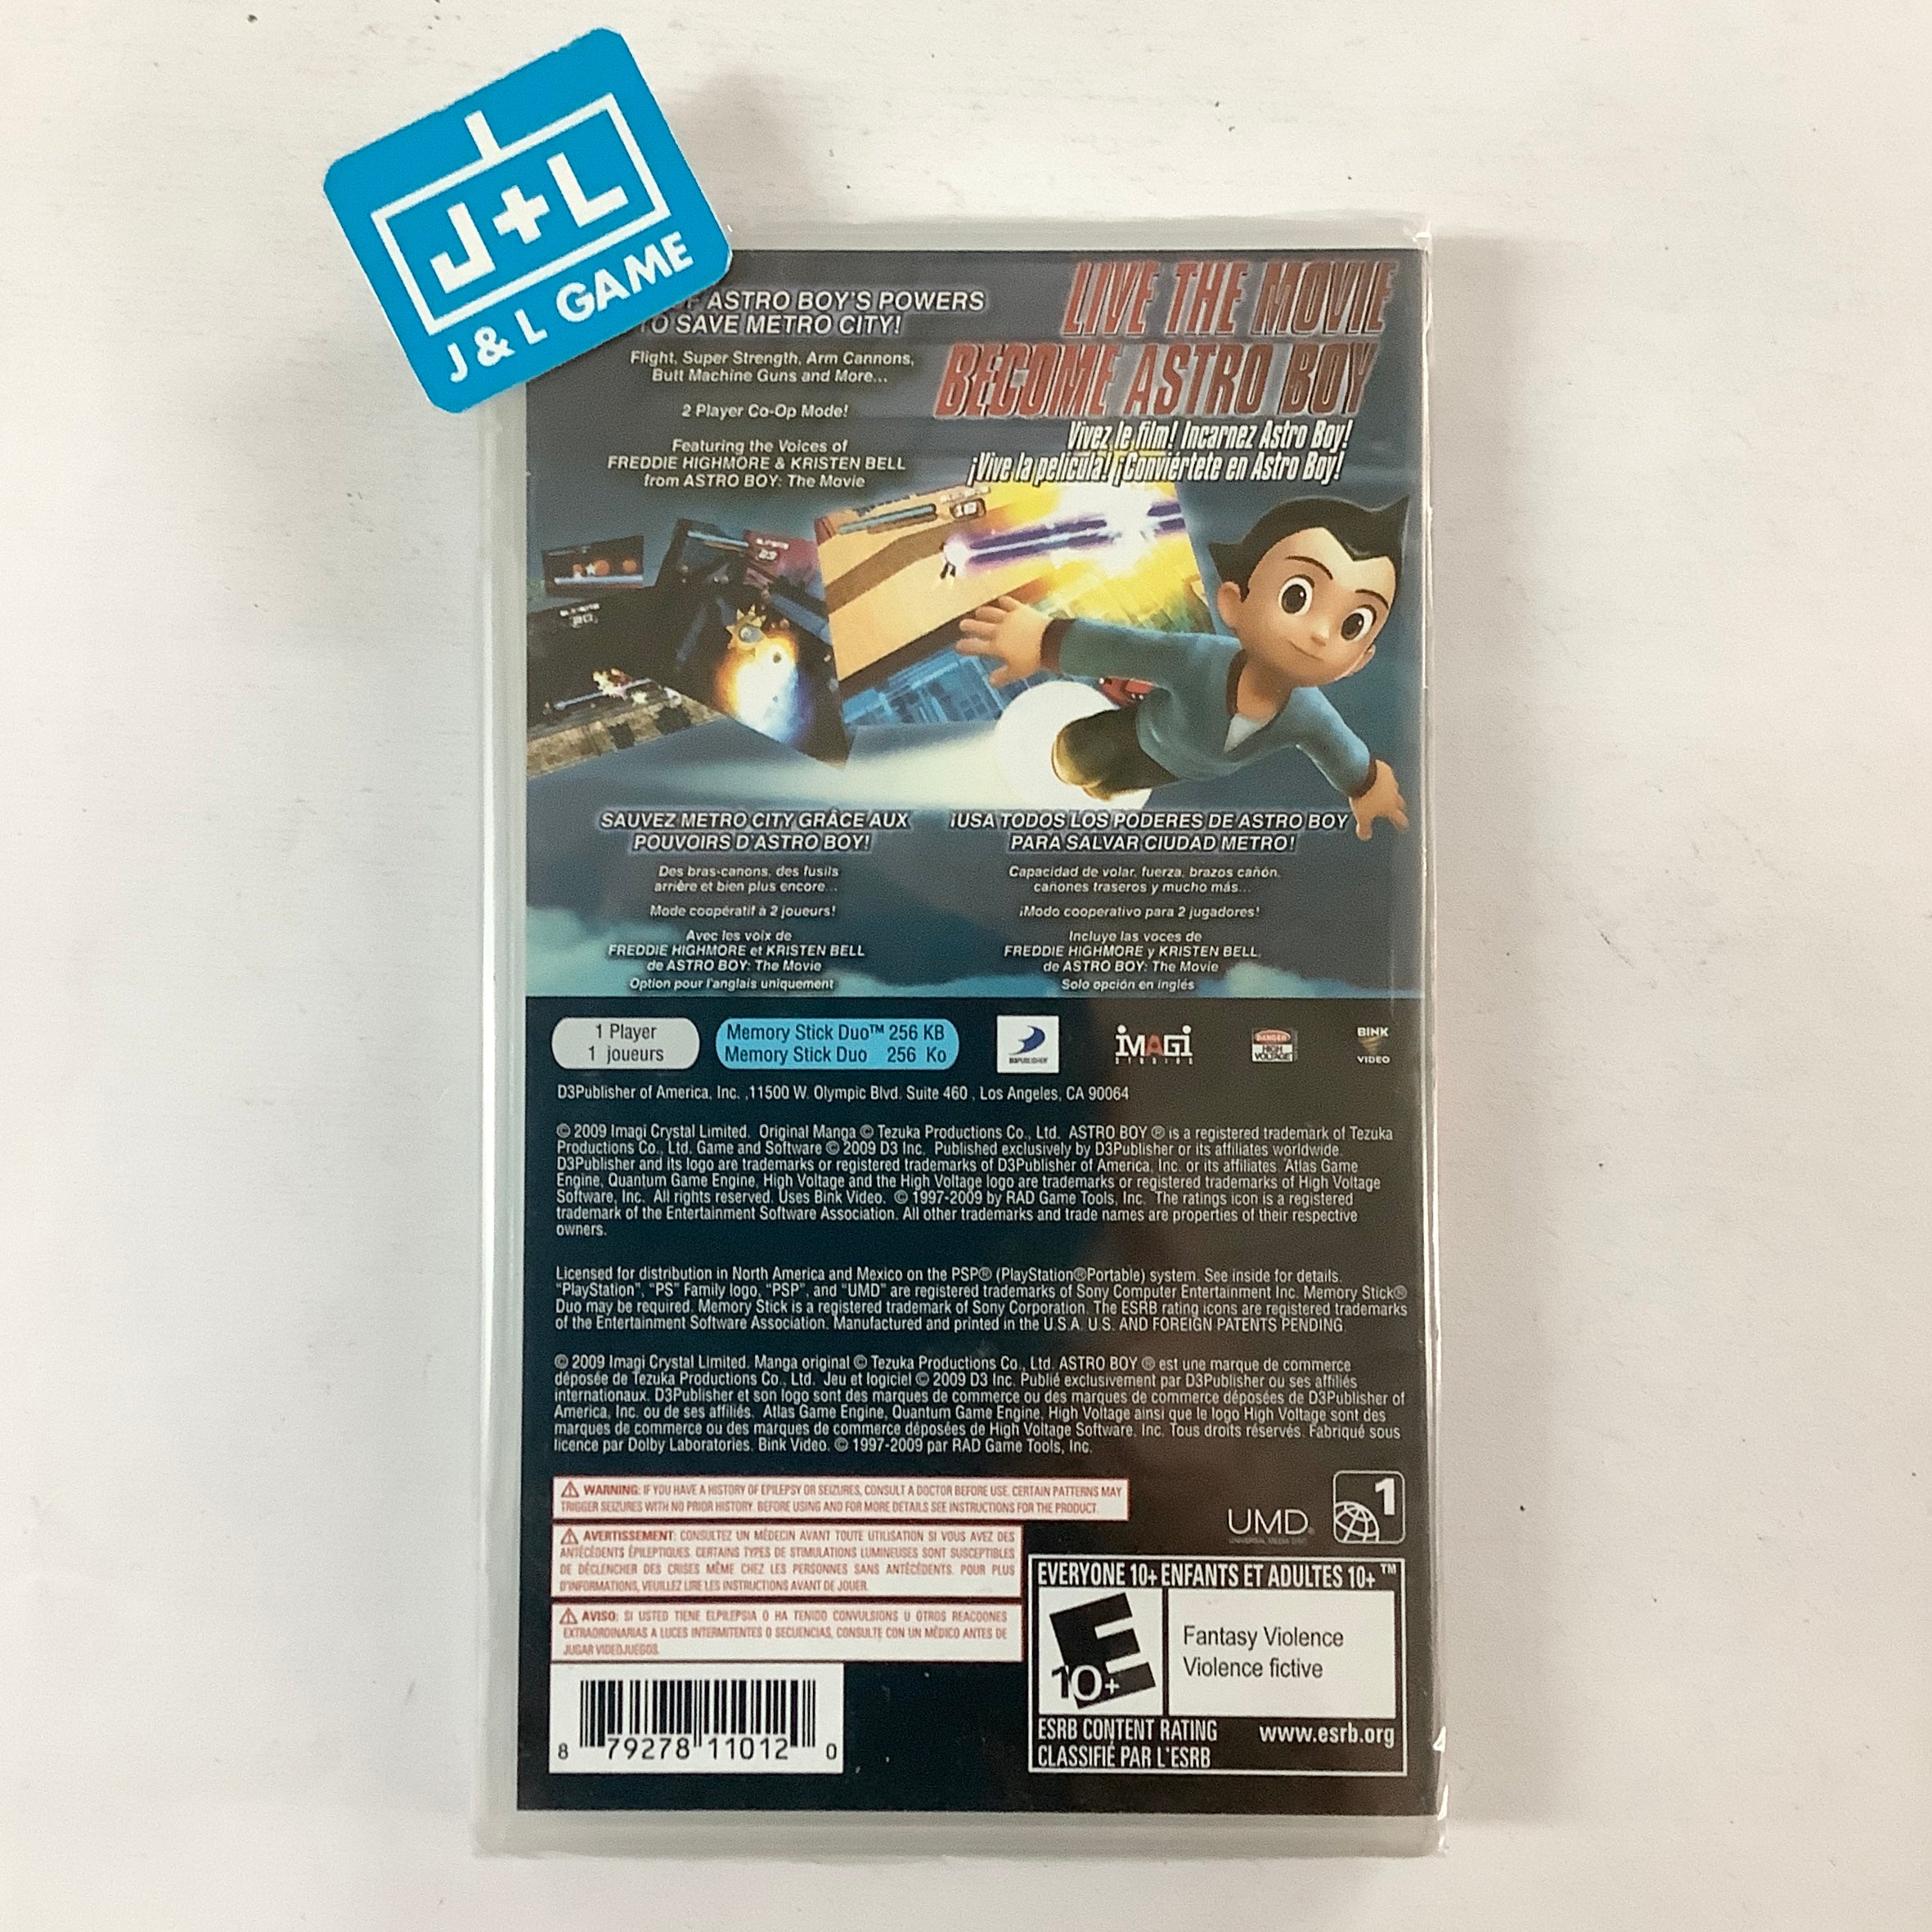 Astro Boy: The Video Game - SONY PSP Video Games D3Publisher   